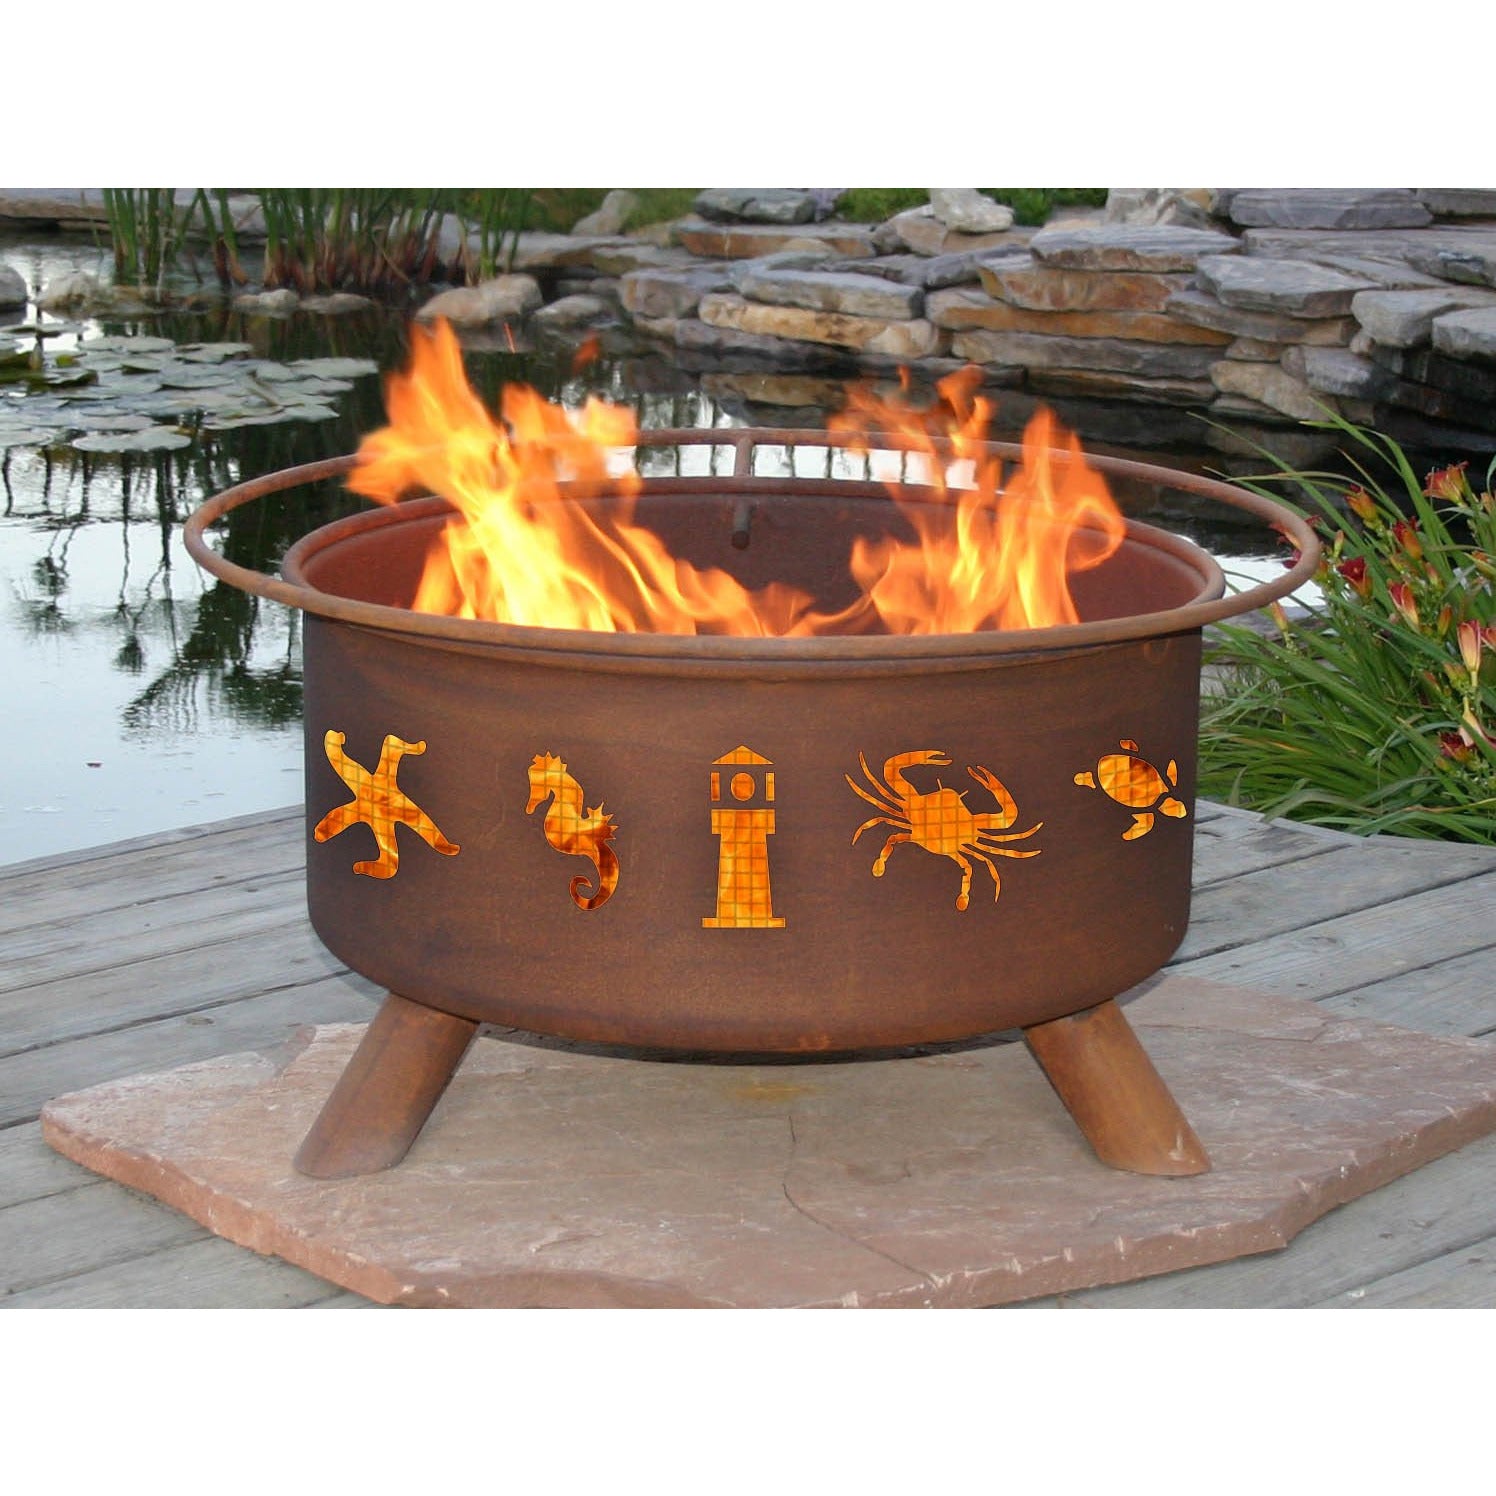 Atlantic Coast Ocean Design Steel Wood and Charcoal Fire Pit for Patio, Fireplace - Yardify.com